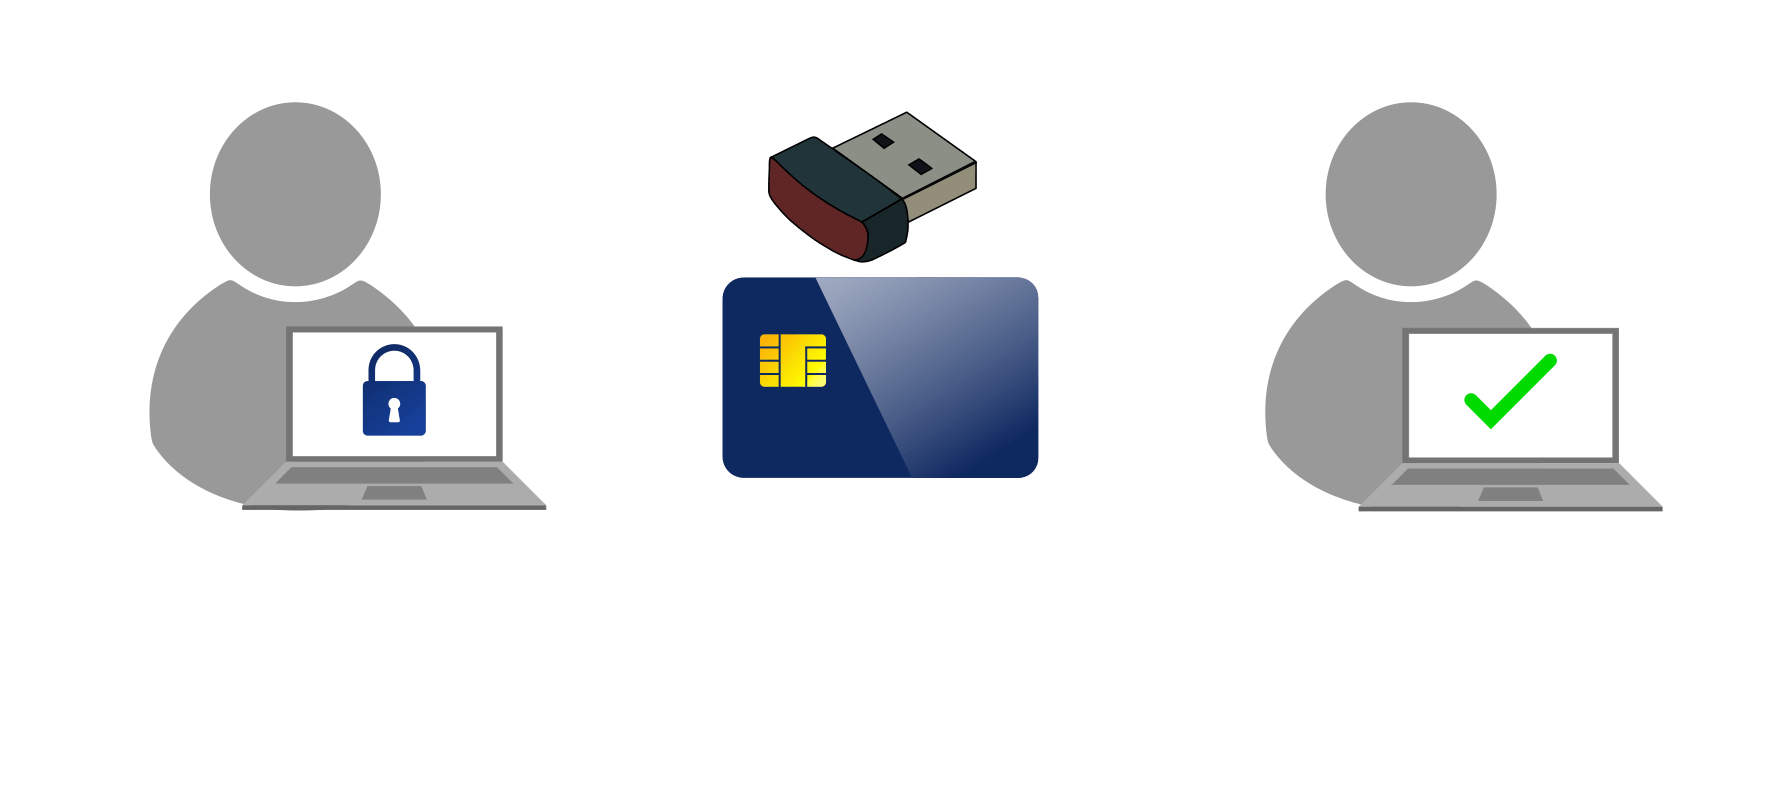 Secure login using digital certificates with PKI USB tokens and smart cards.